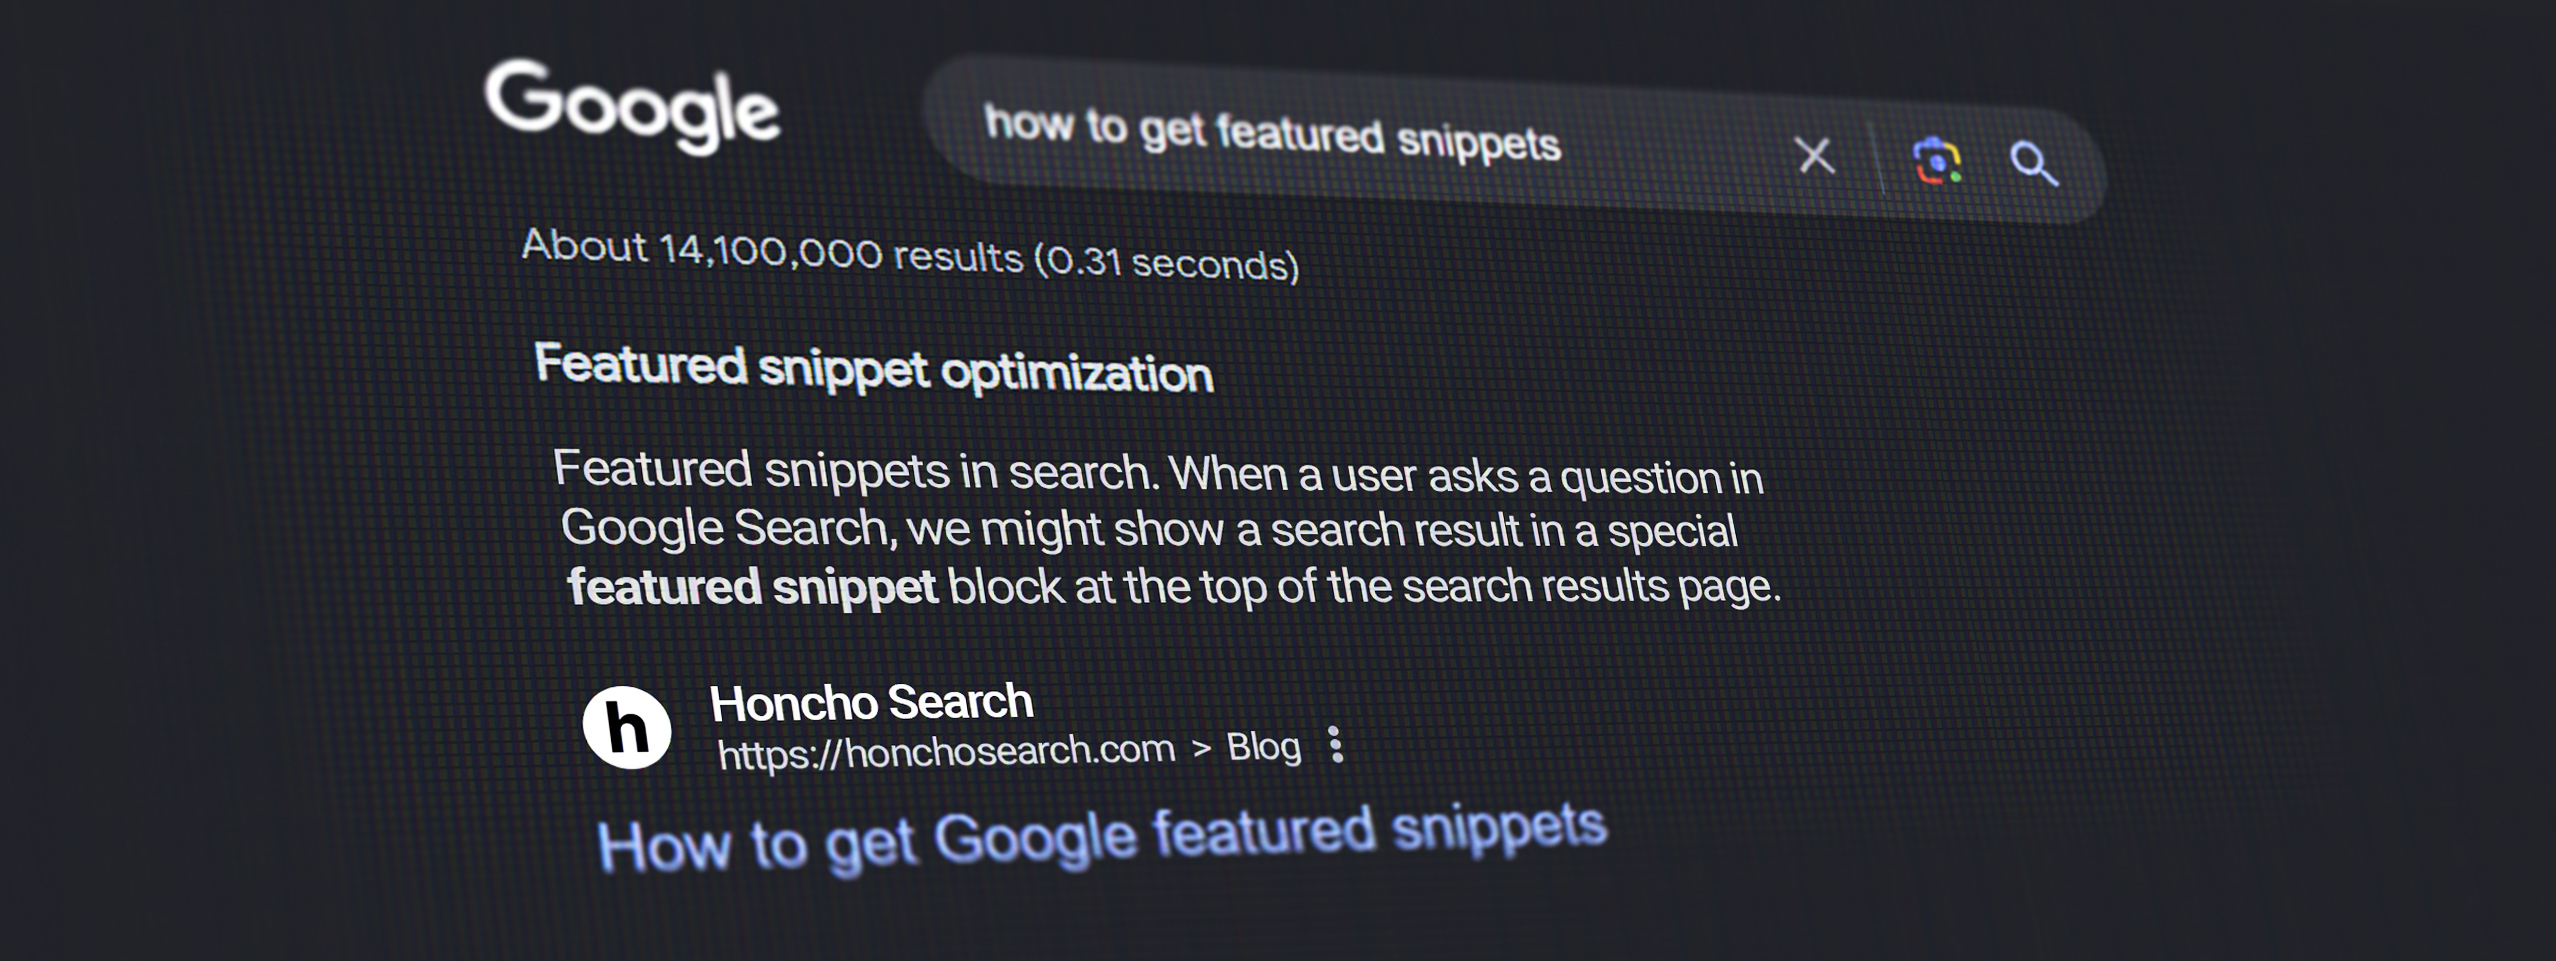 How to get Featured Snippets